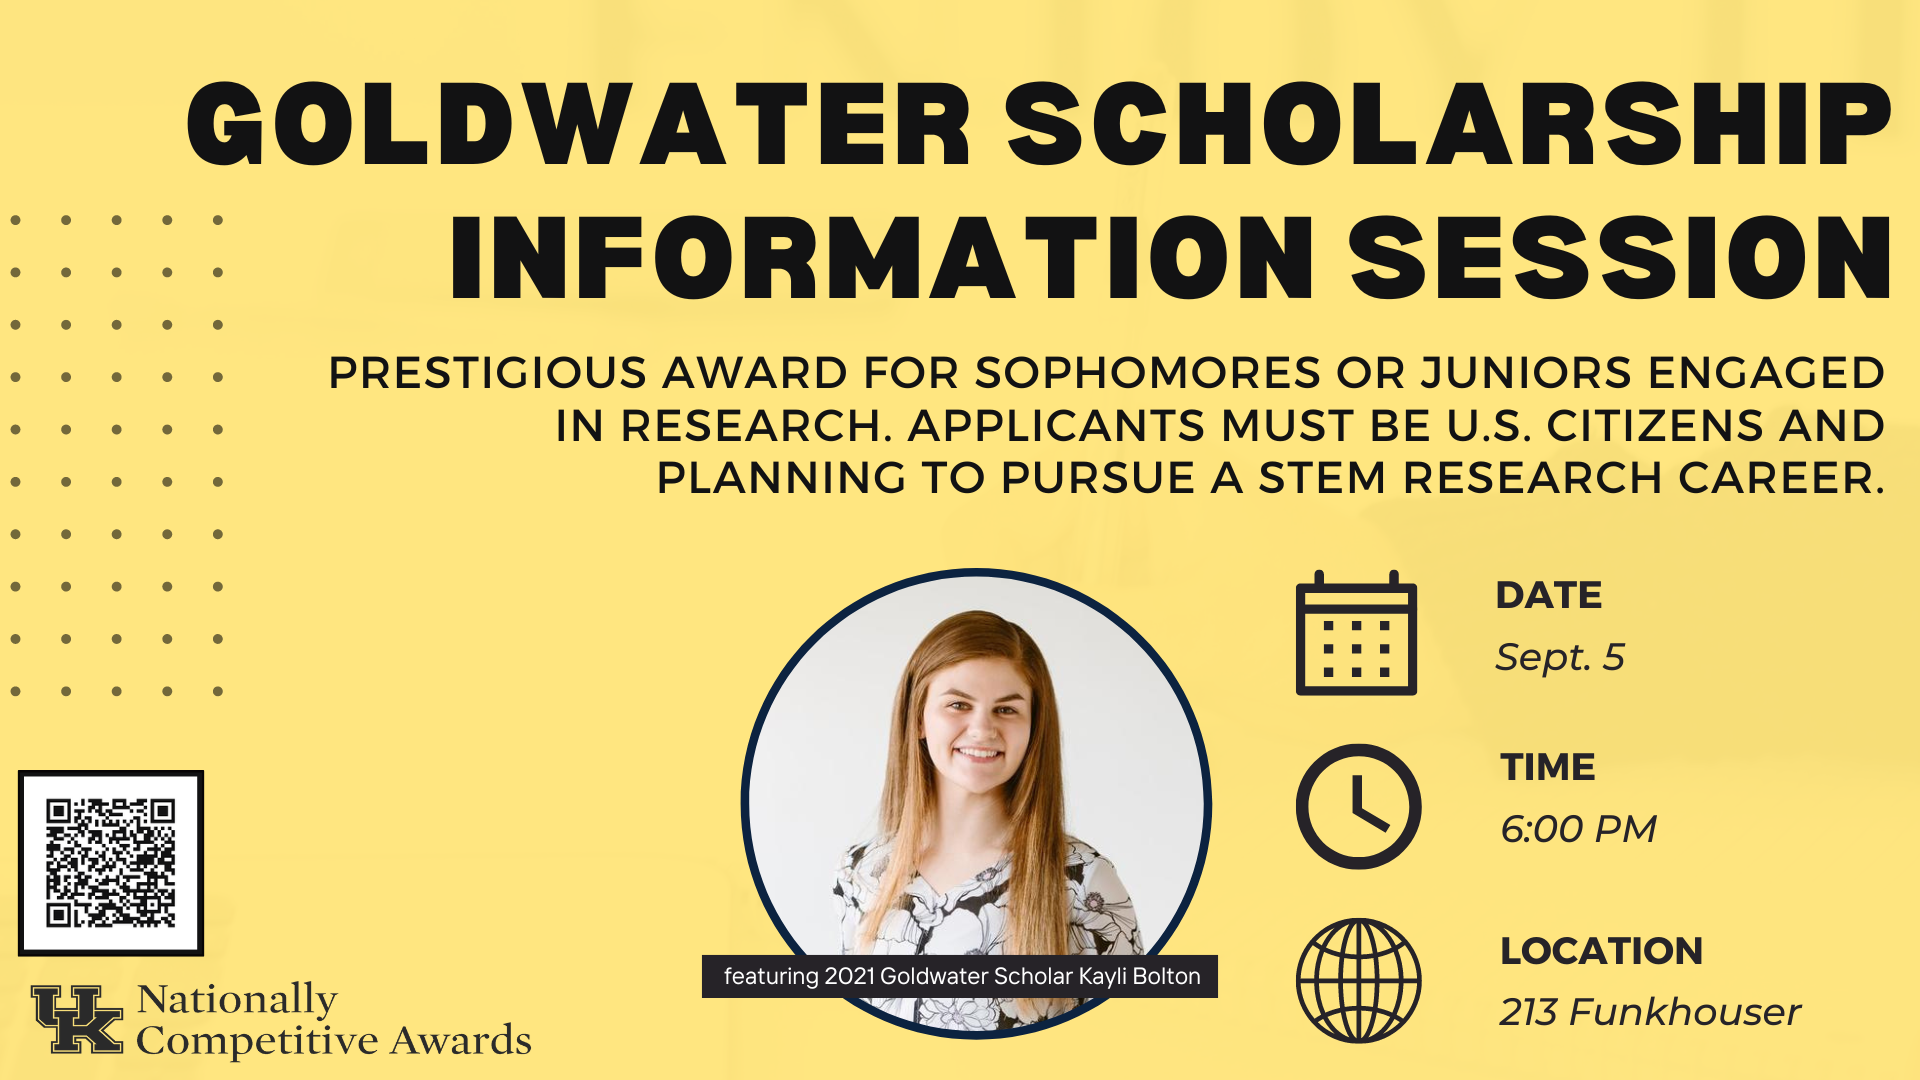 Goldwater Scholarship information session details with headshot of Kayli Bolton